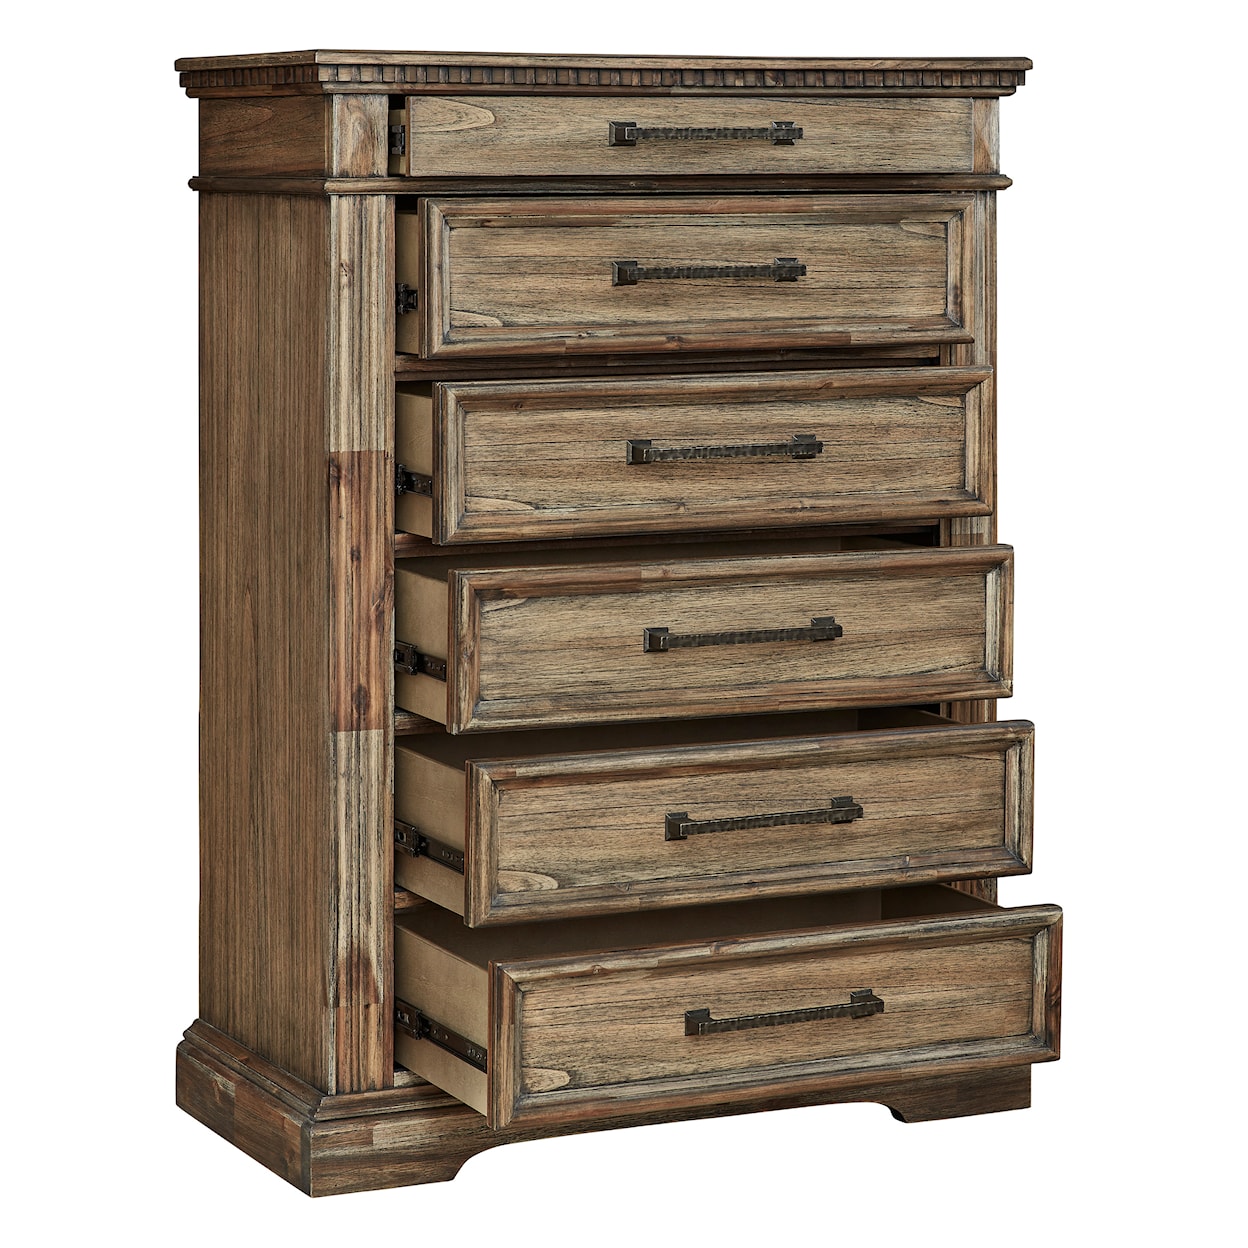 Michael Alan Select Markenburg Chest of Drawers